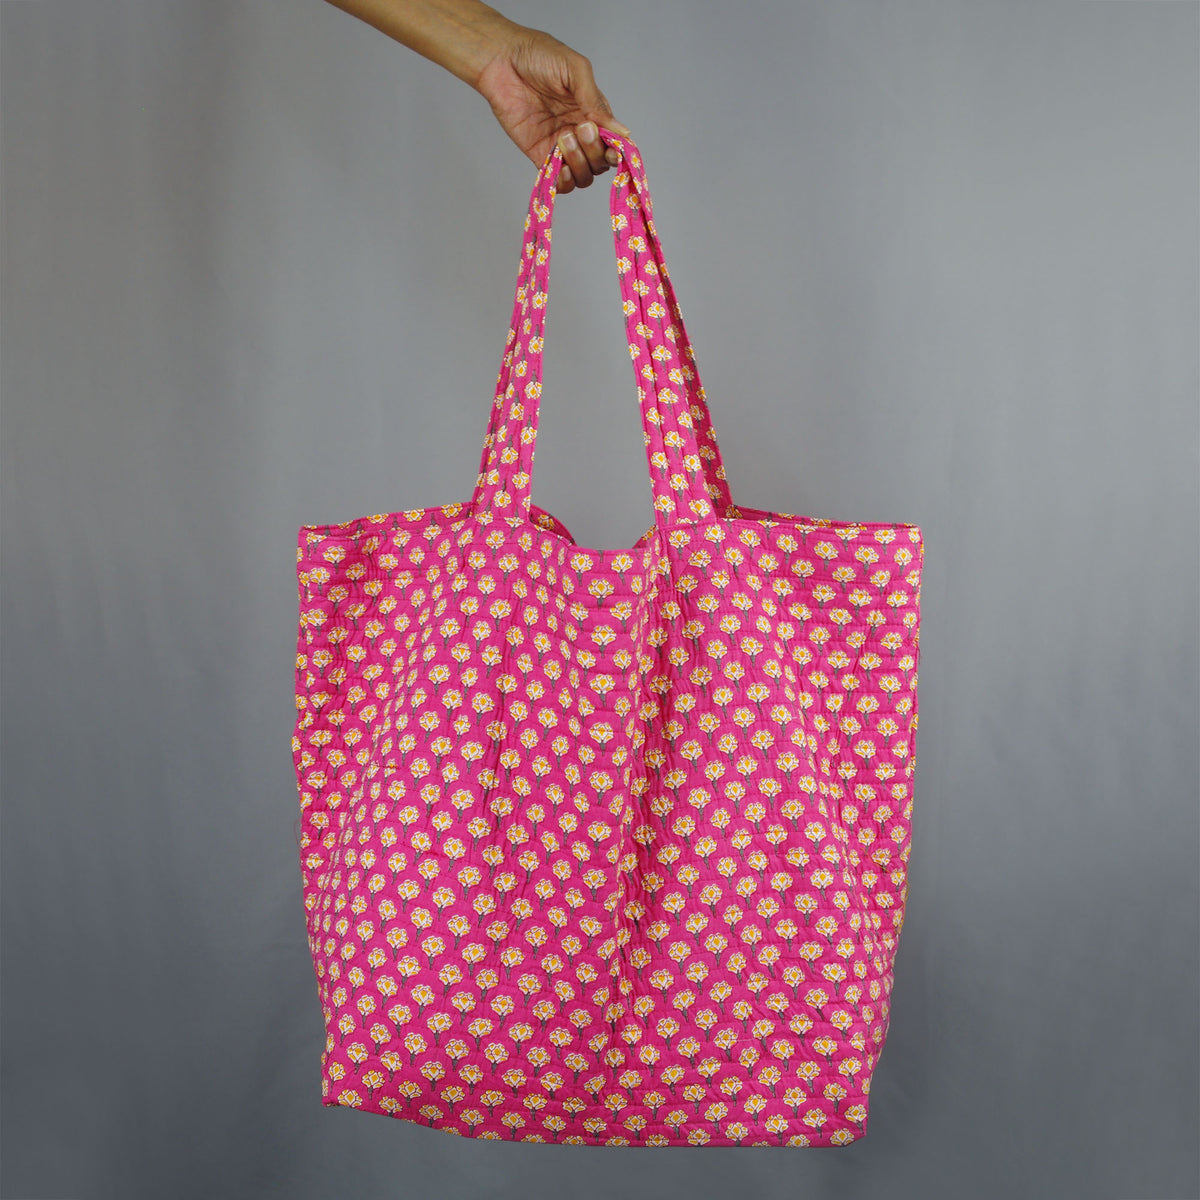 Cotton Quilted Large Shoppping / Beach Bag - Yellow Flowers On Pink